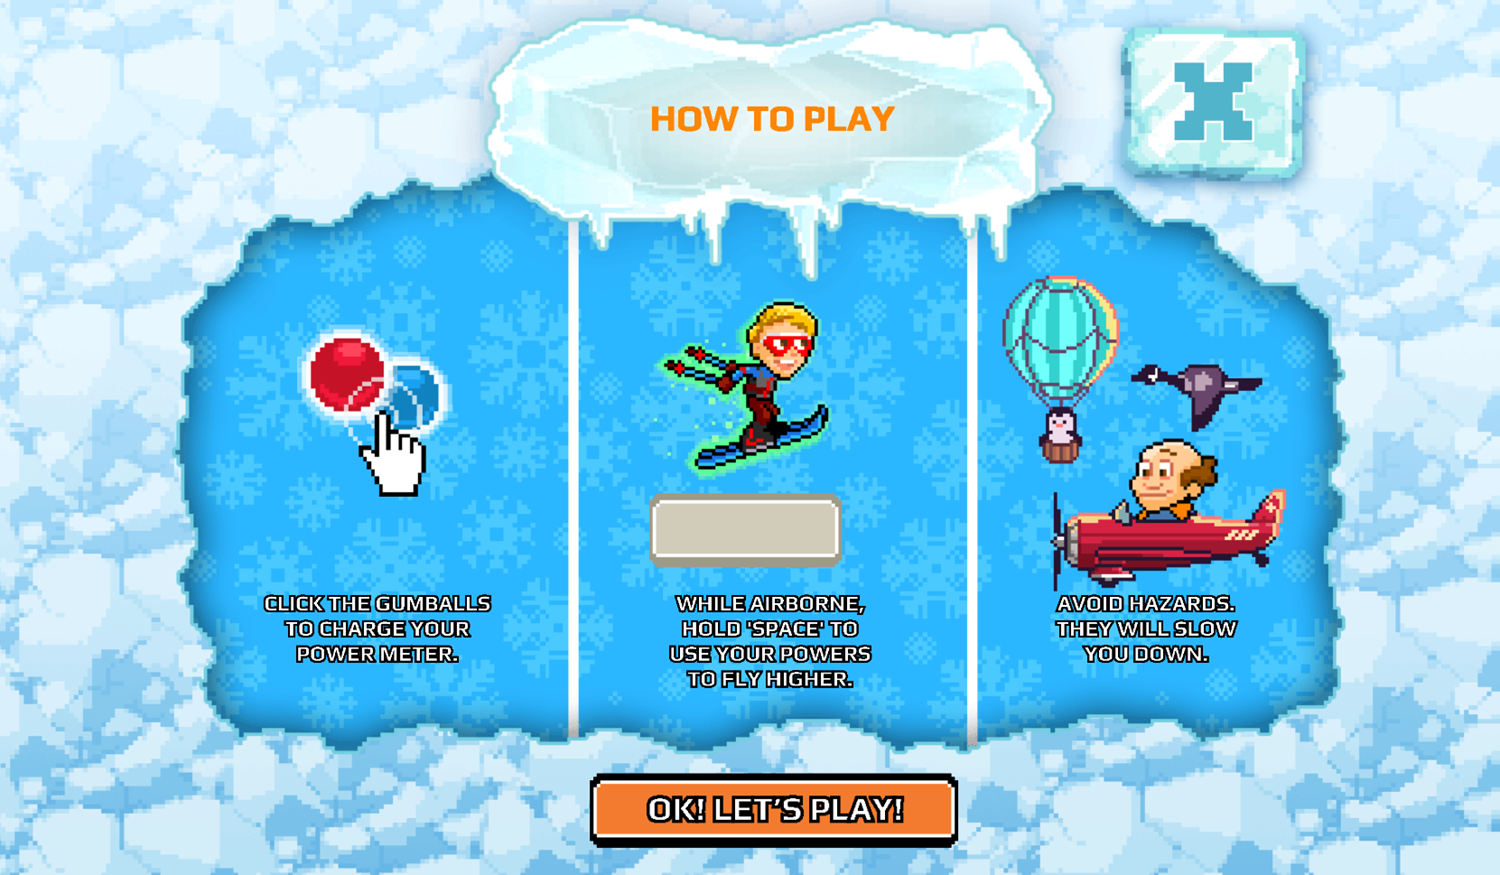 Nick Champions of the Chill 2 Game Light Speed Skiing How To Play Screenshot.